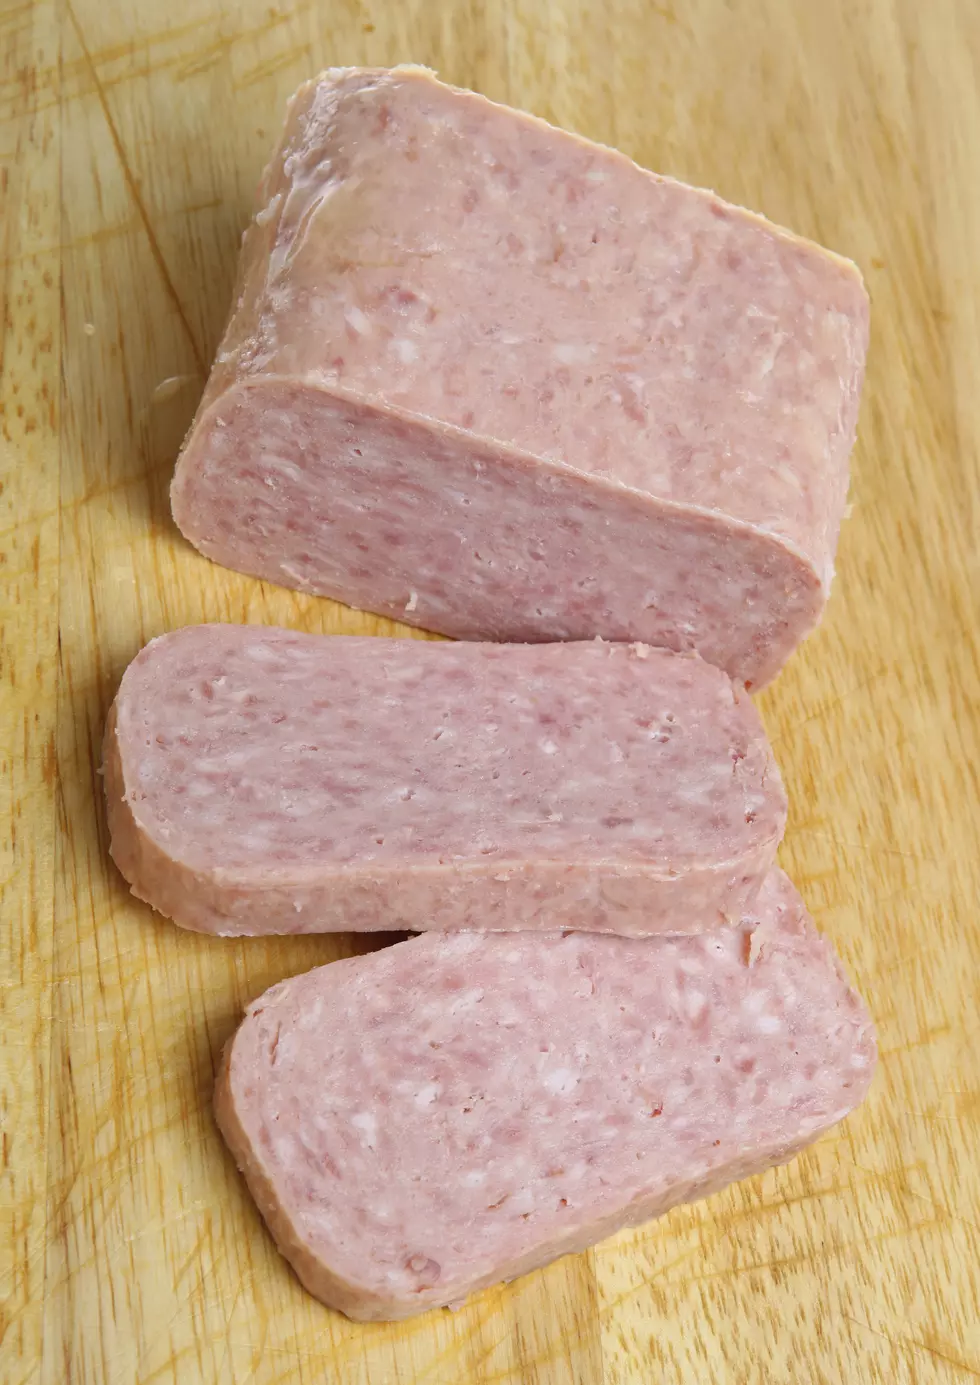 The USDA Is Recalling SPAM